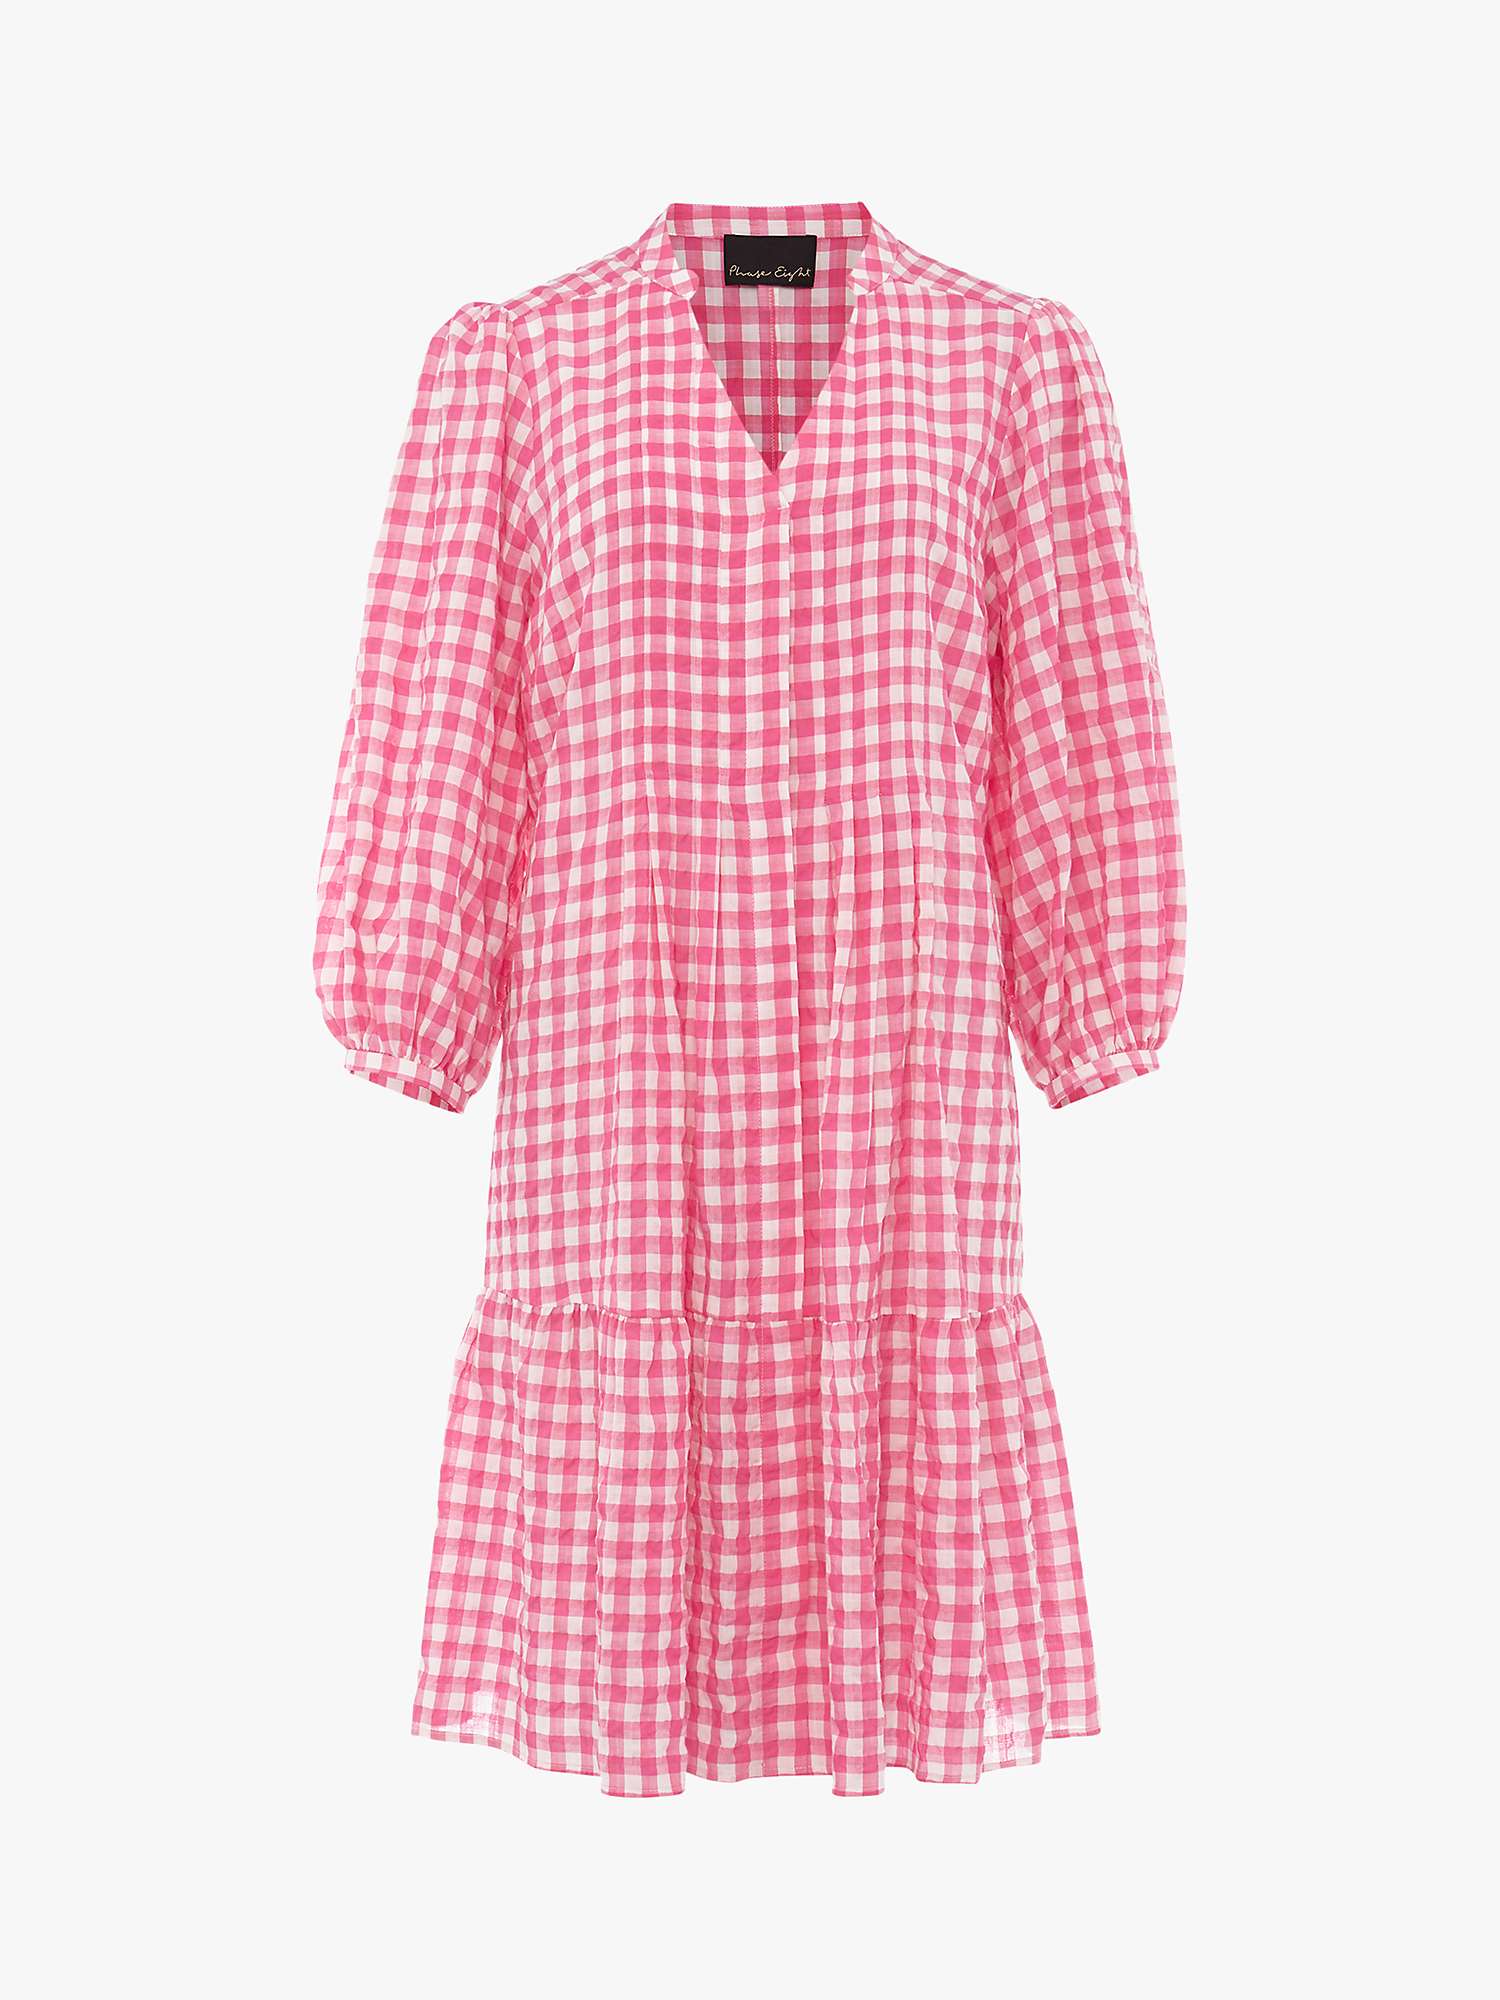 Phase Eight Oona Gingham Swing Dress, Pink/Ivory at John Lewis & Partners